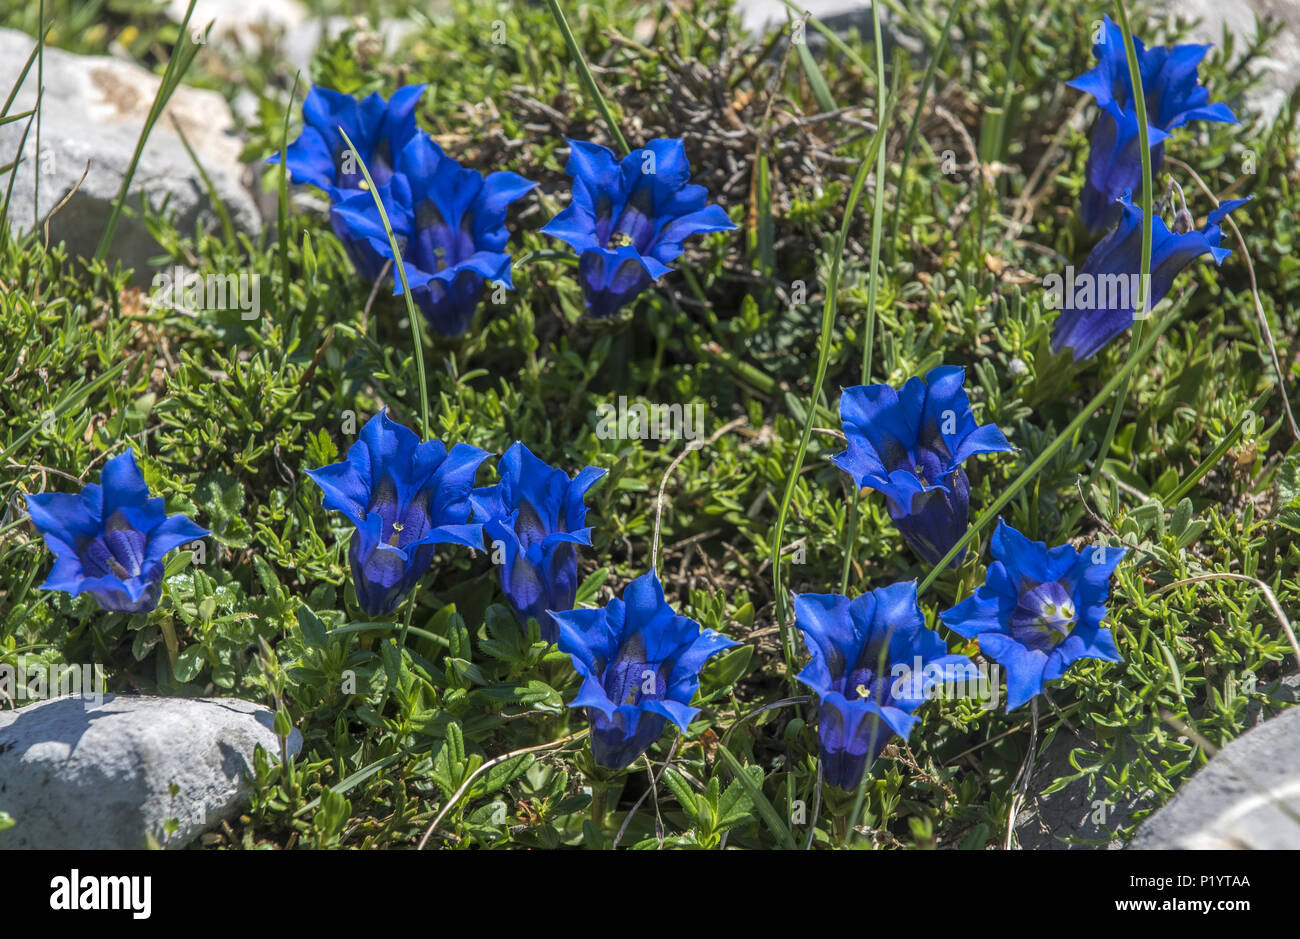 Spain, National park of los Picos de Europa, Gentiana clusii from the family of the Gentianaceae Stock Photo